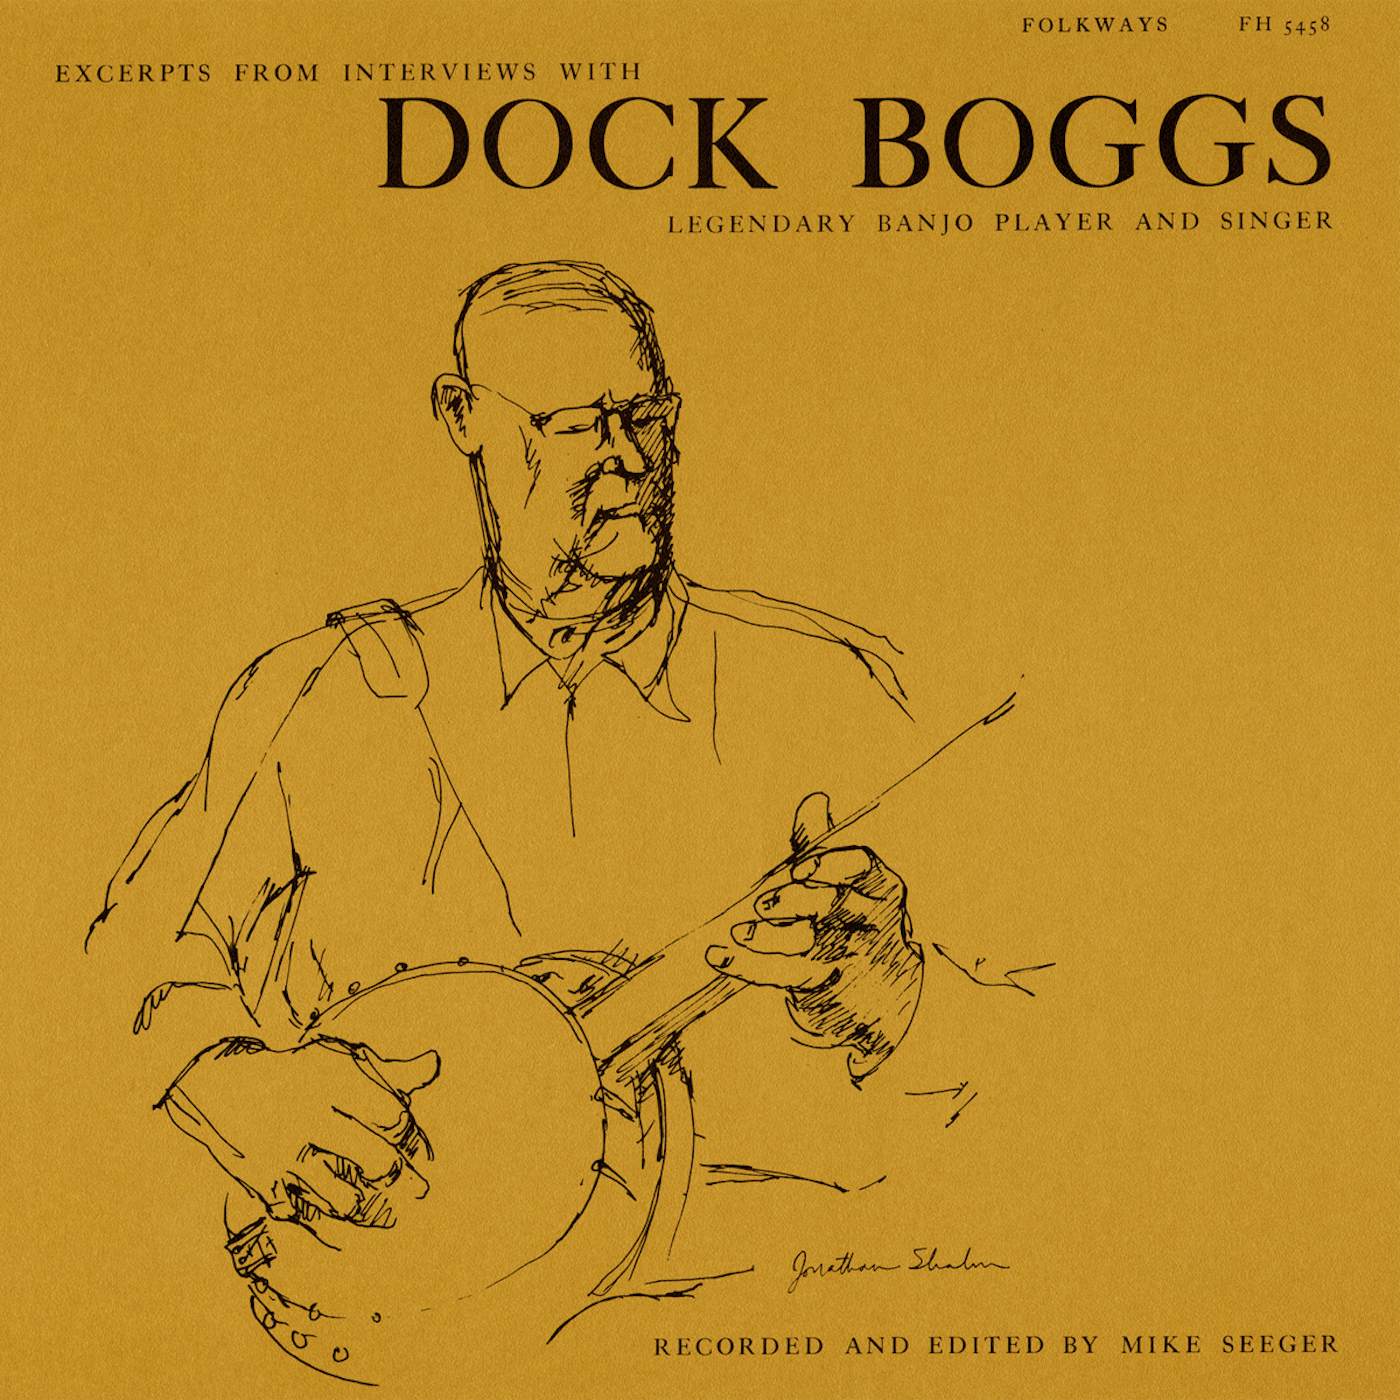 EXCERPTS FROM INTERVIEWS WITH DOCK BOGGS CD